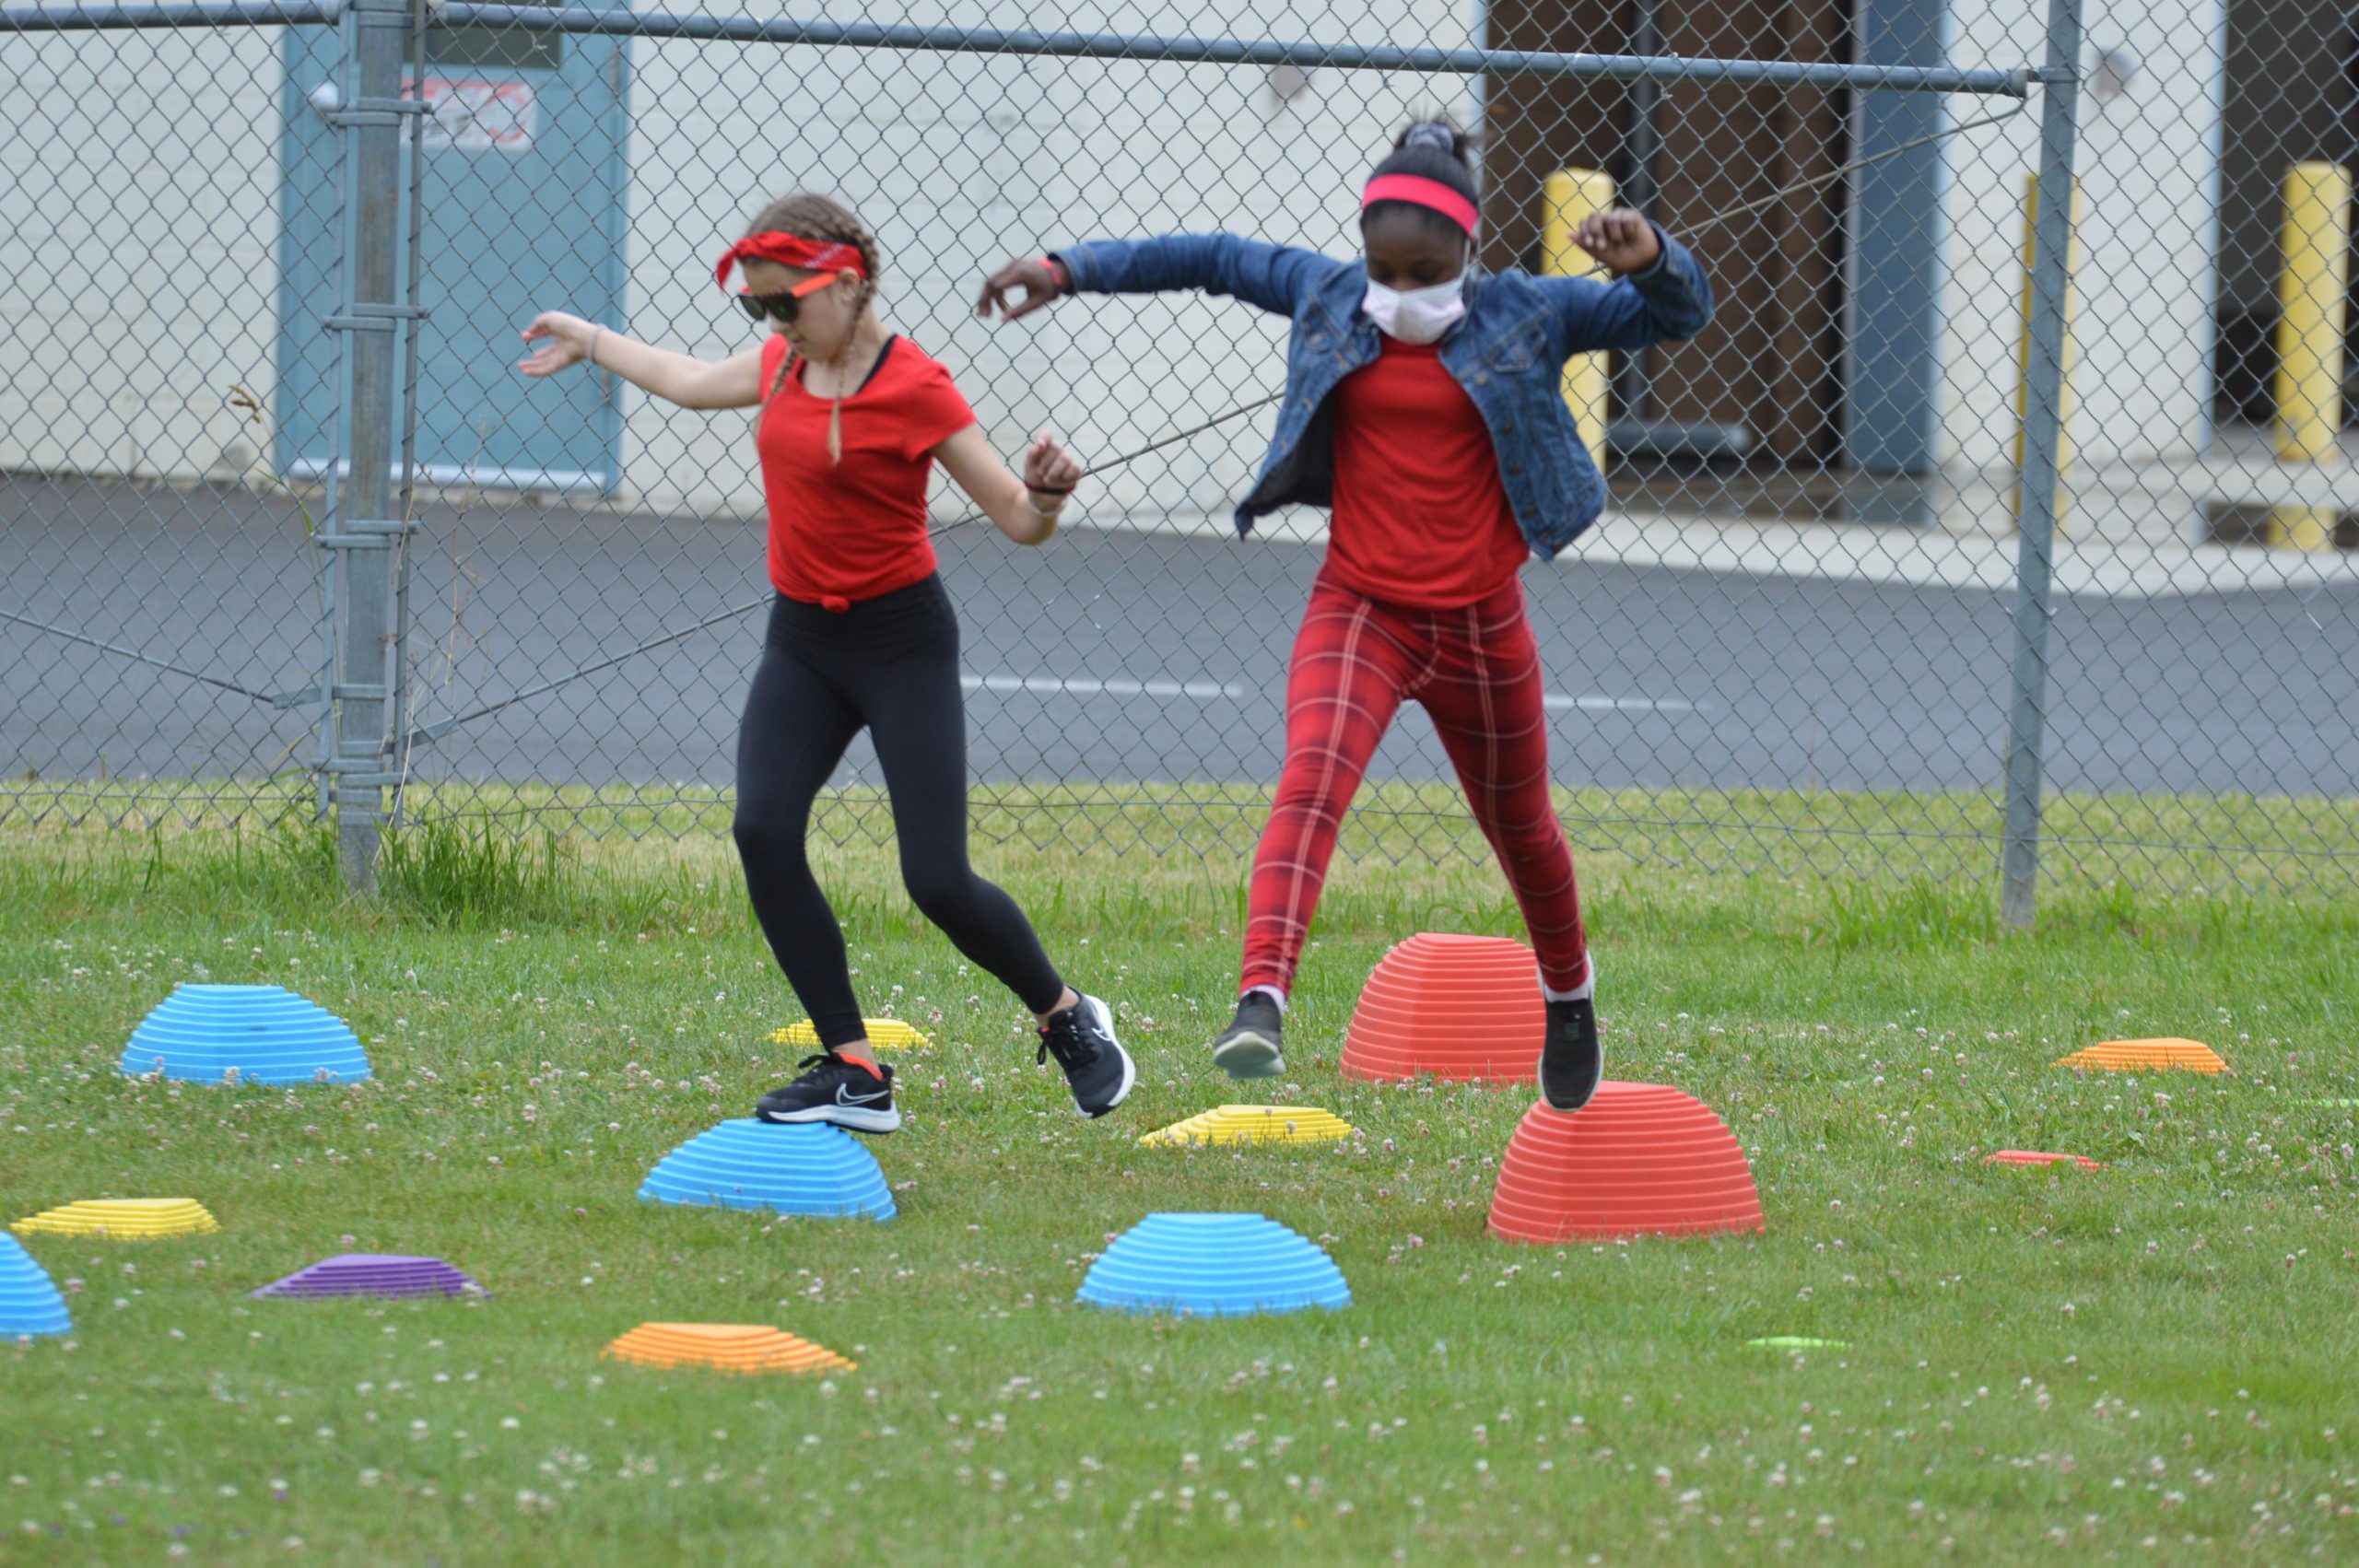 Students playing at Goff Field Day